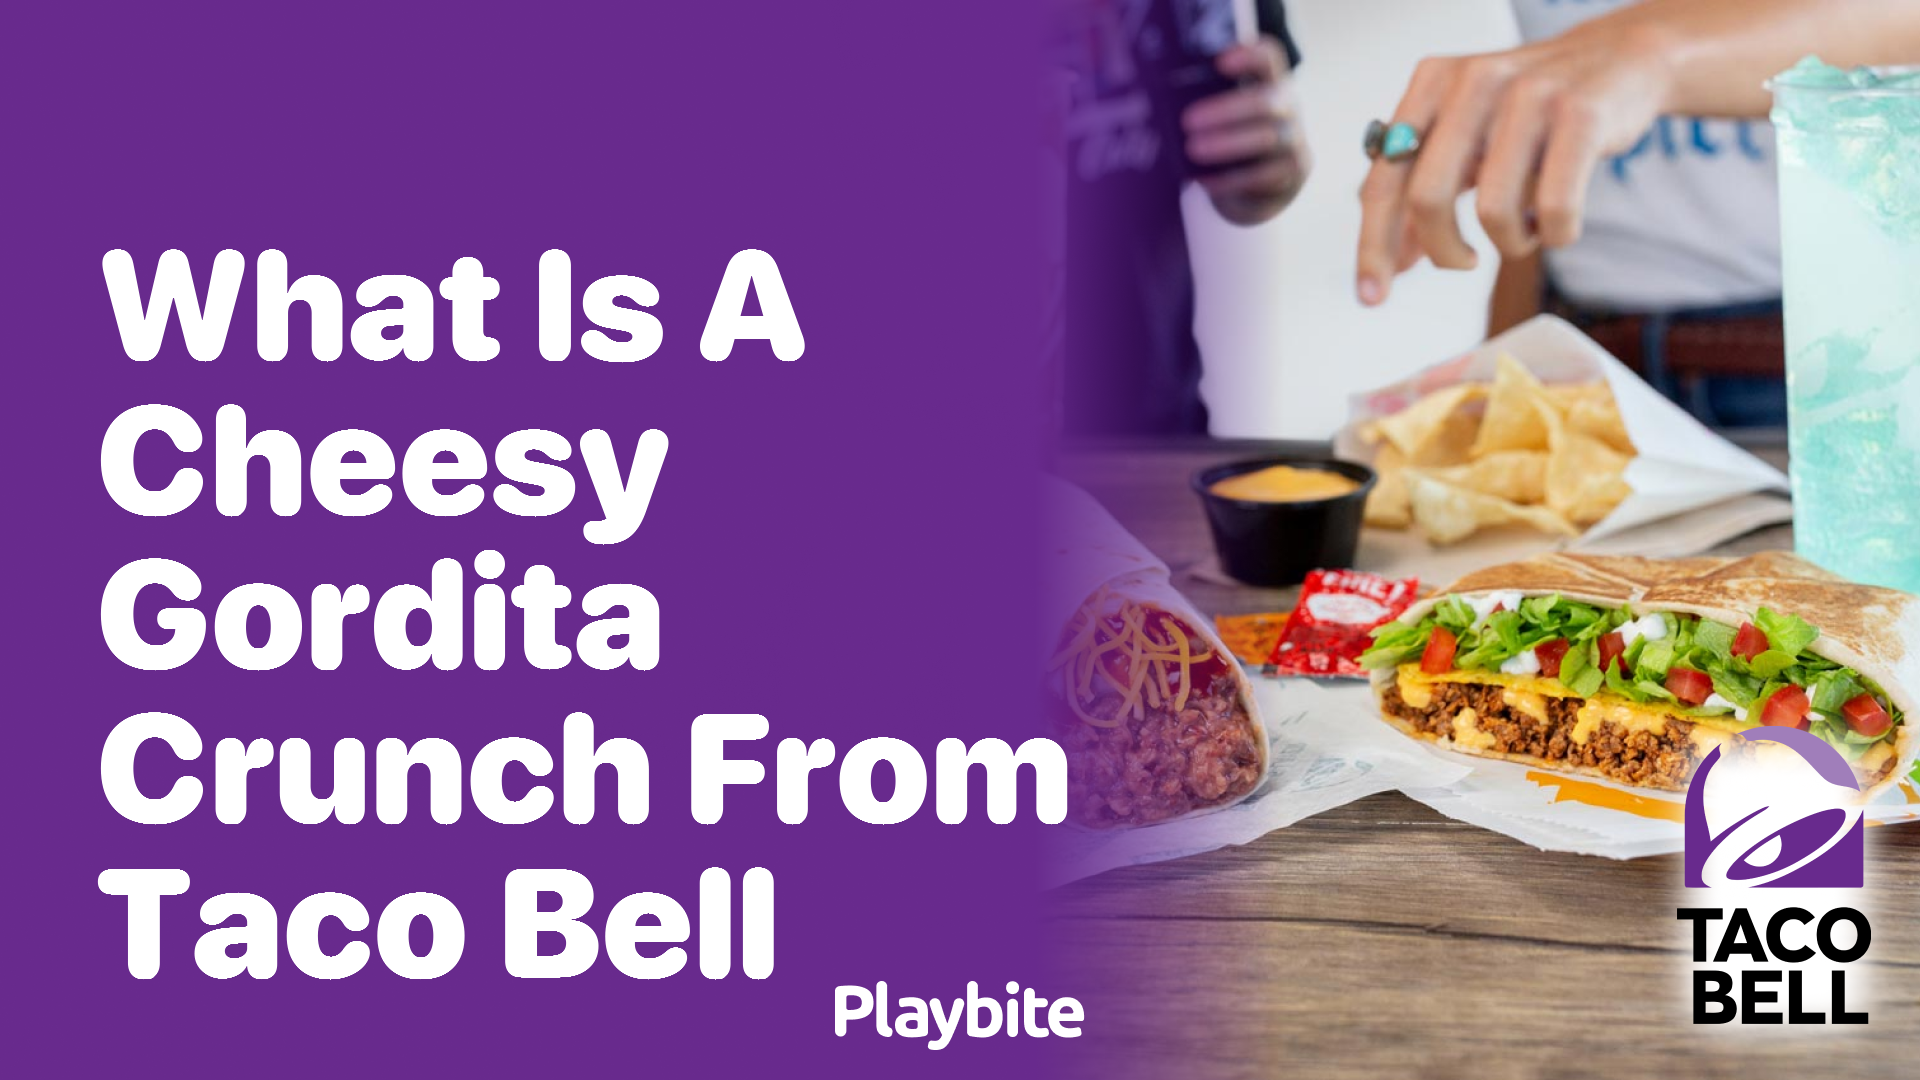 What Is a Cheesy Gordita Crunch From Taco Bell?